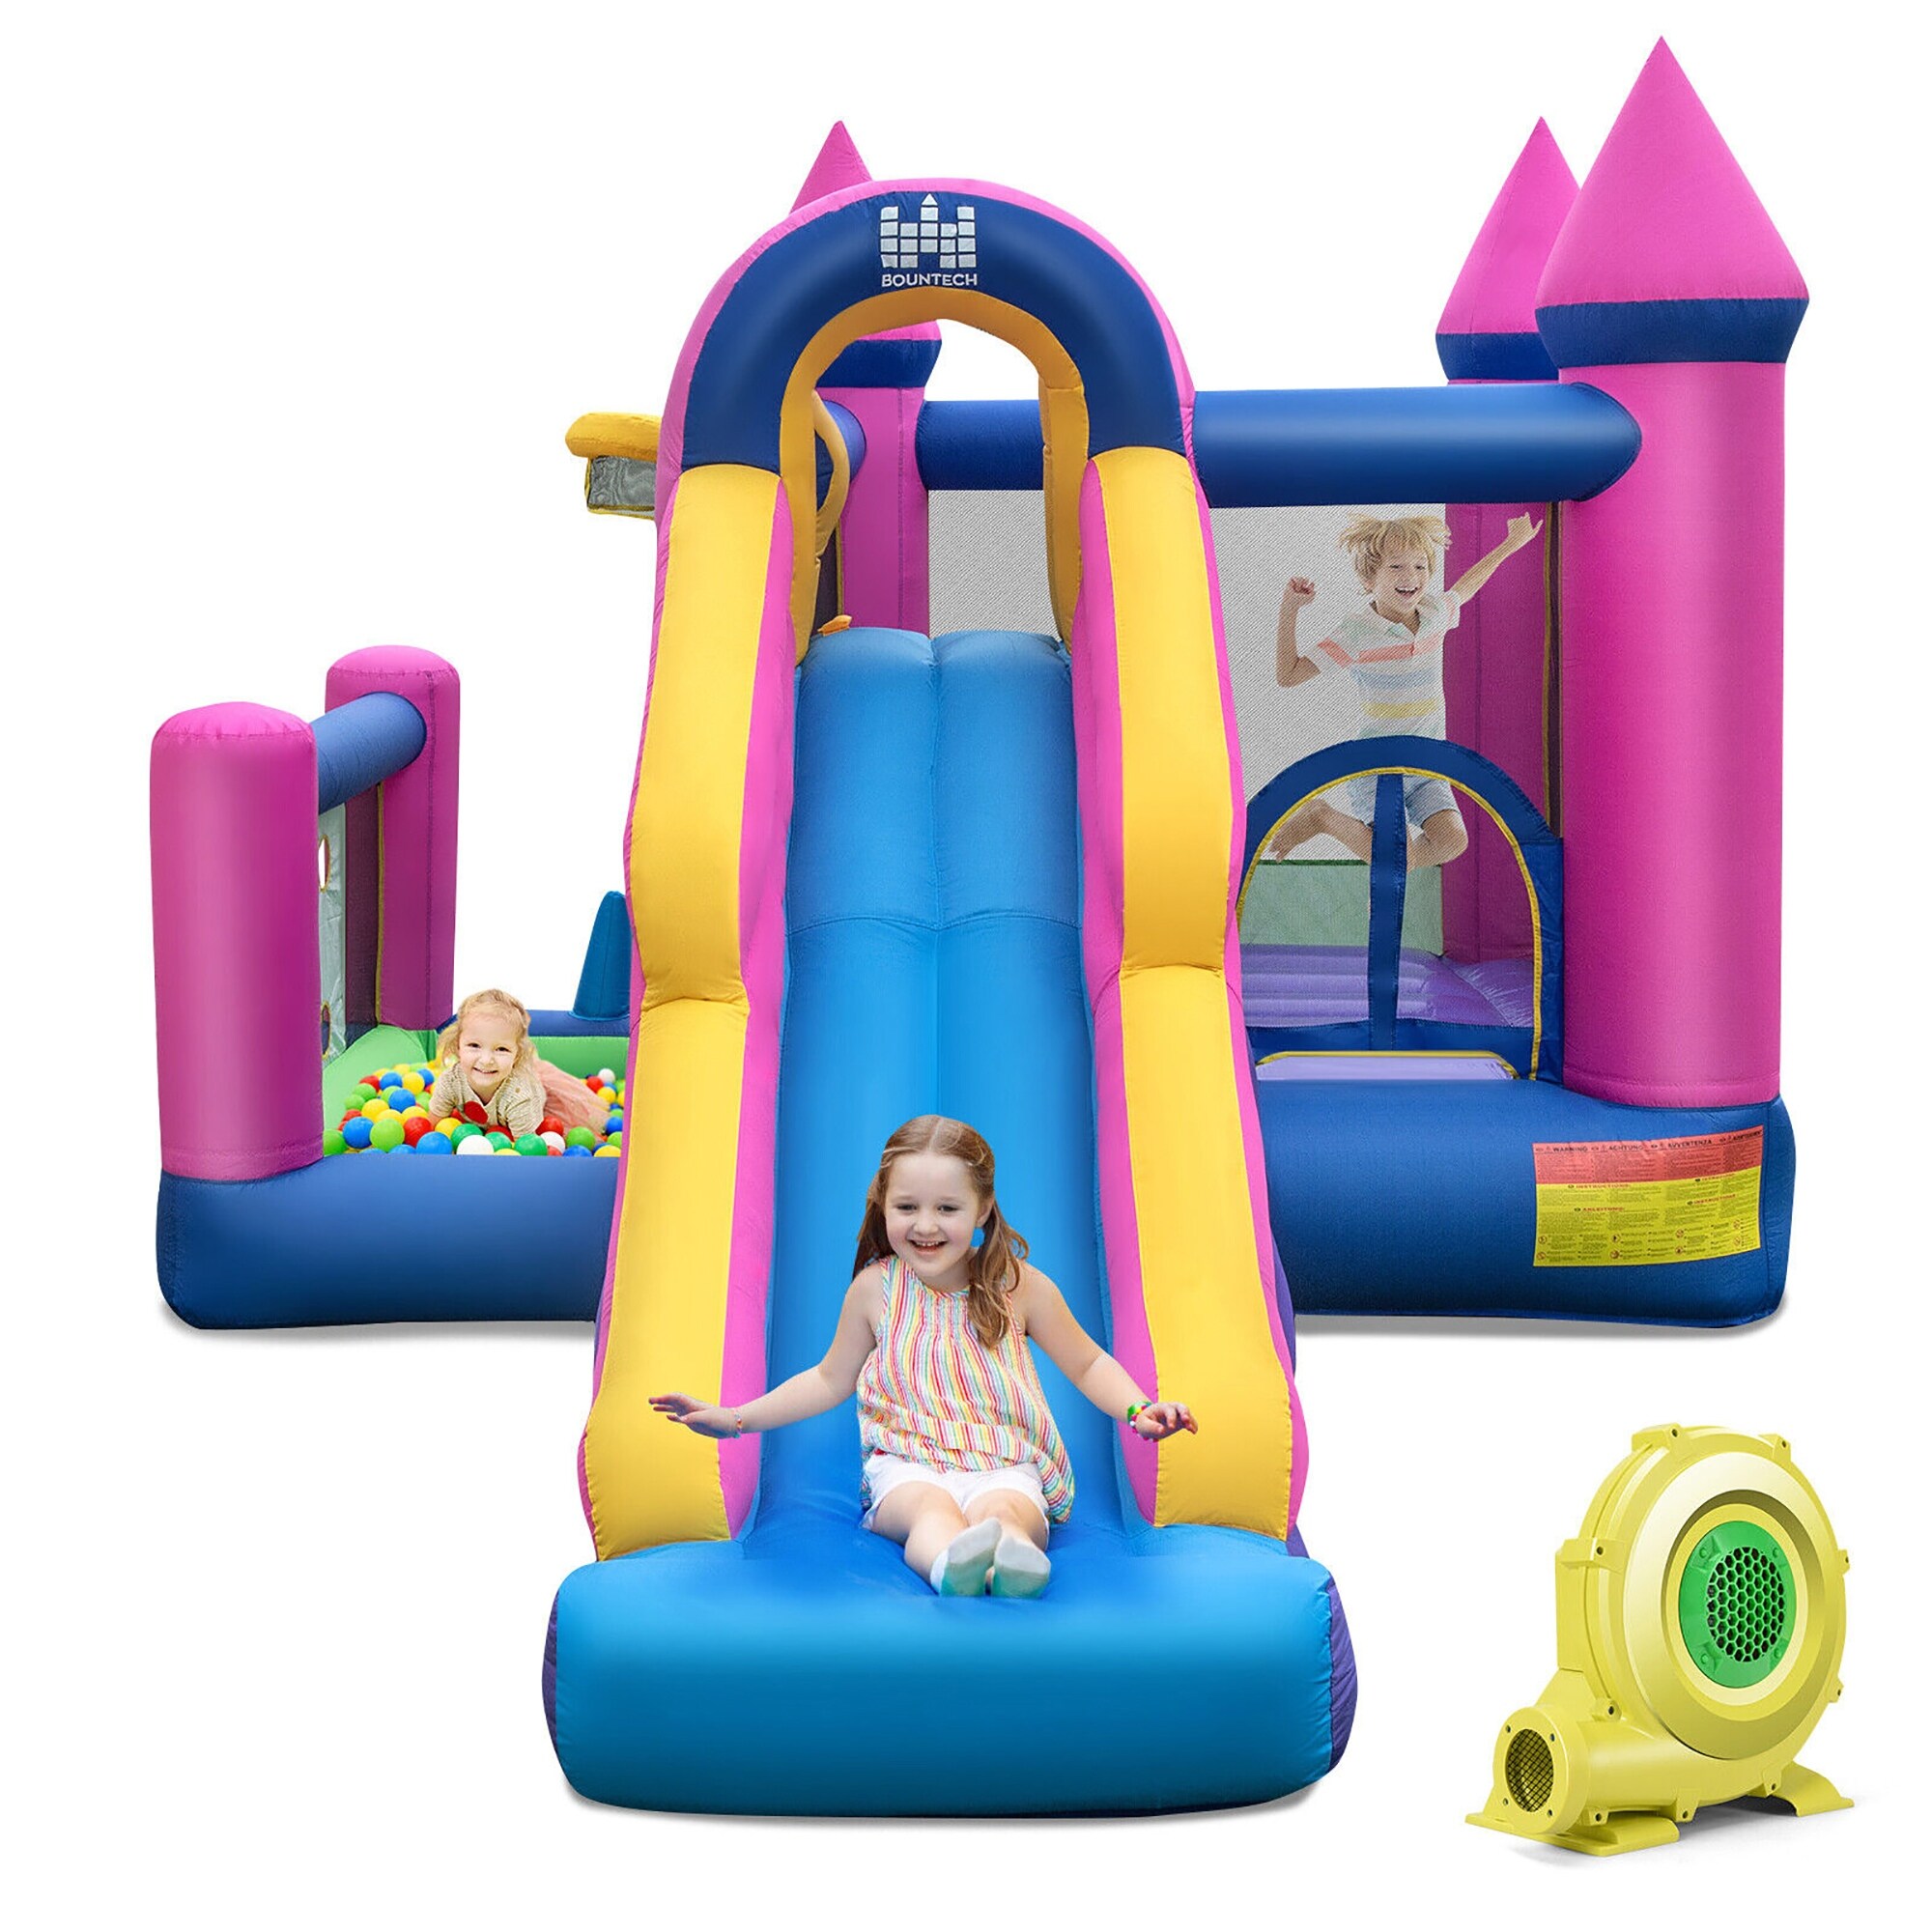 Gymax Kids Inflatable Bounce Castle 7-in-1 Jumping House w/ Long Slide